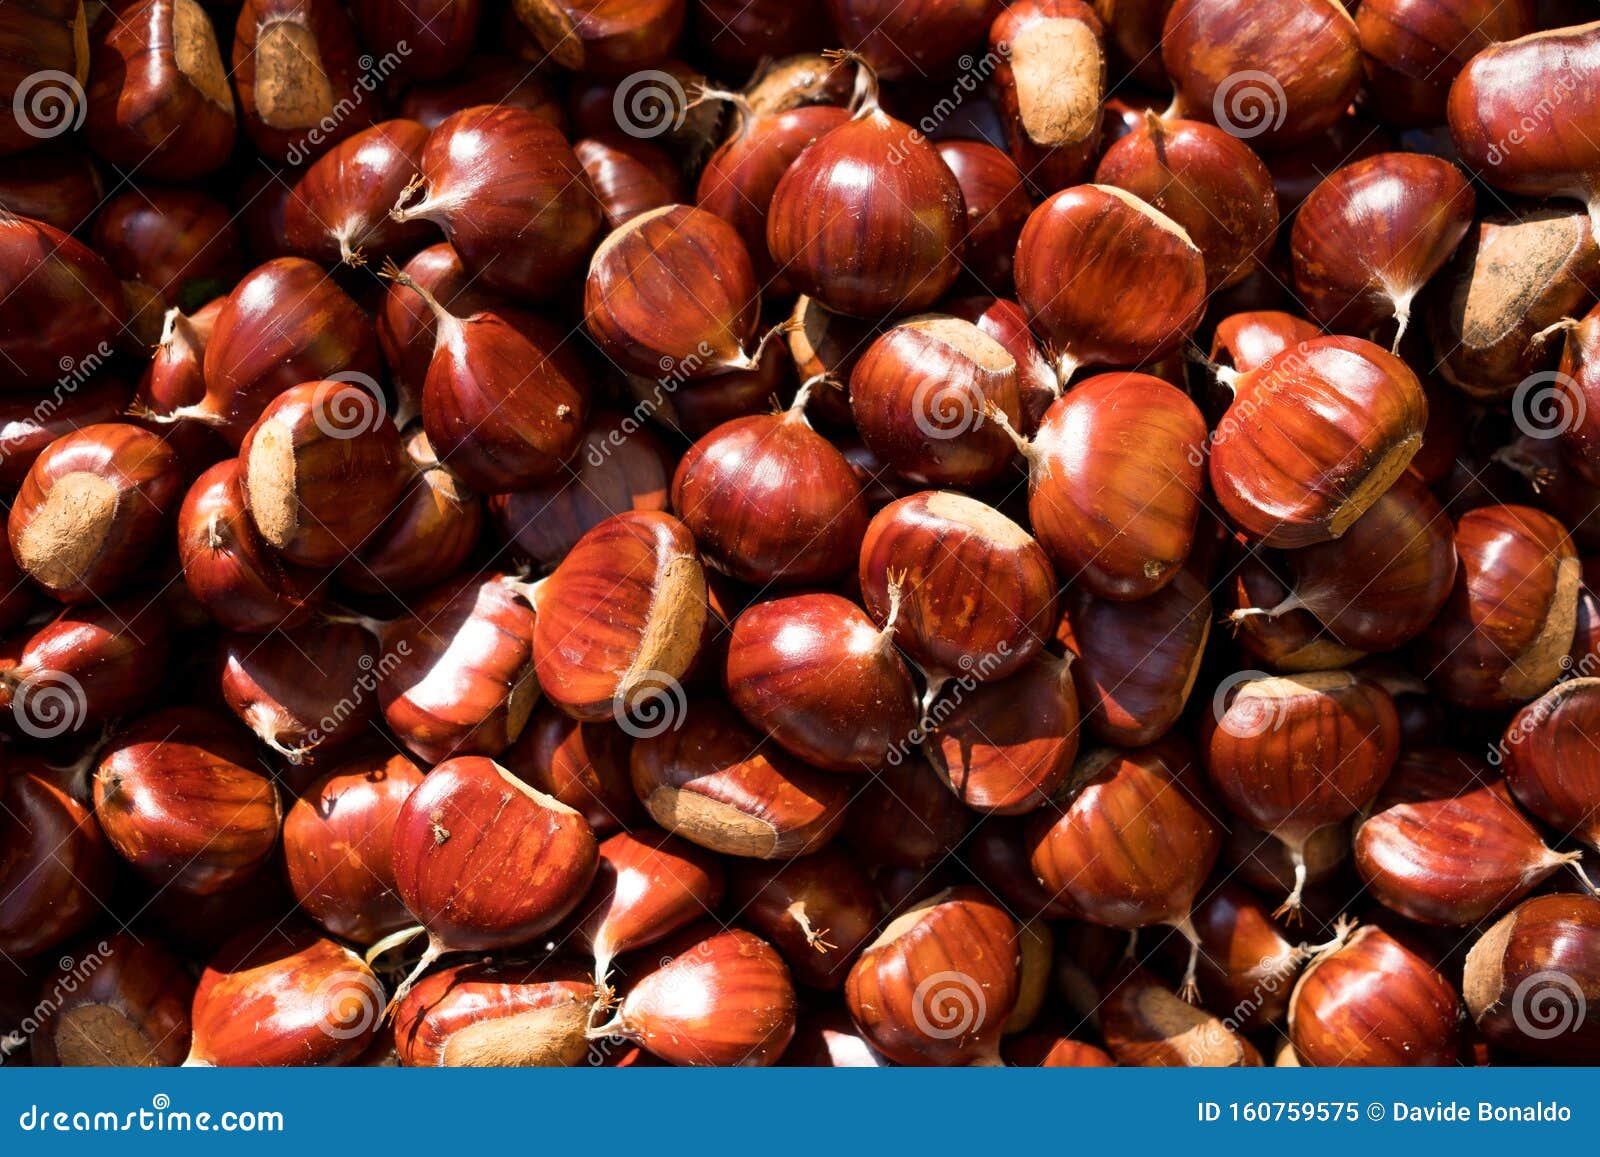 close up of brown ripe chestnuts in a basket during autumn harvest, whole fresh and seasonal food for a healthy diet